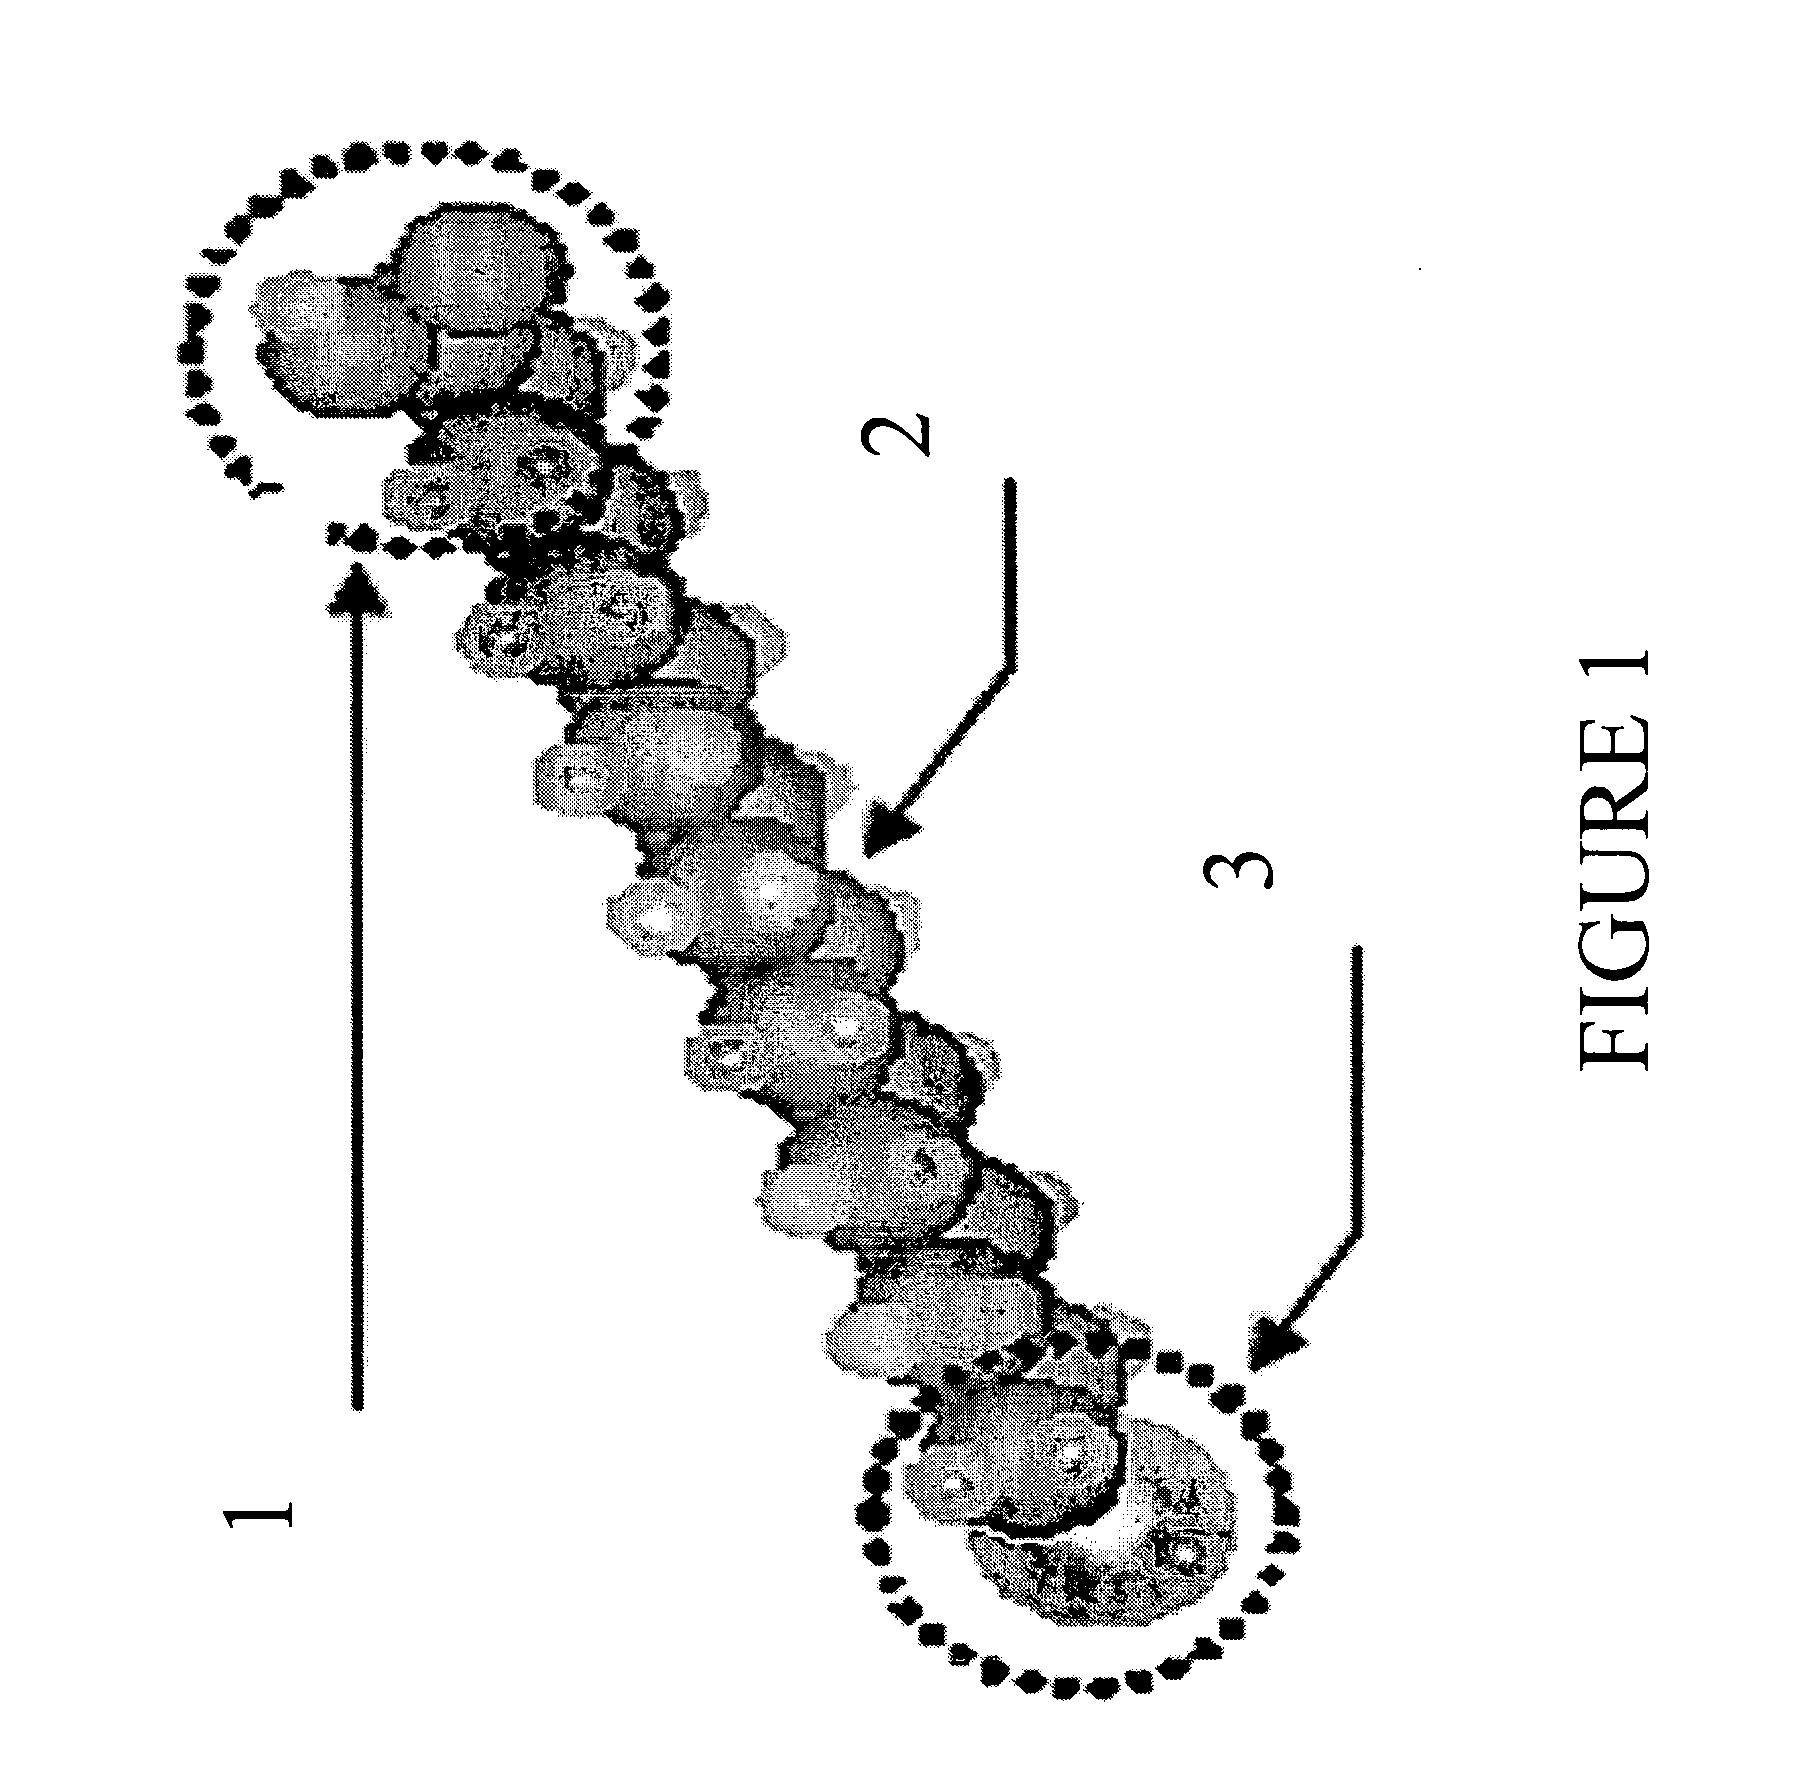 Method for selective deposition of a thin self-assembled monolayer